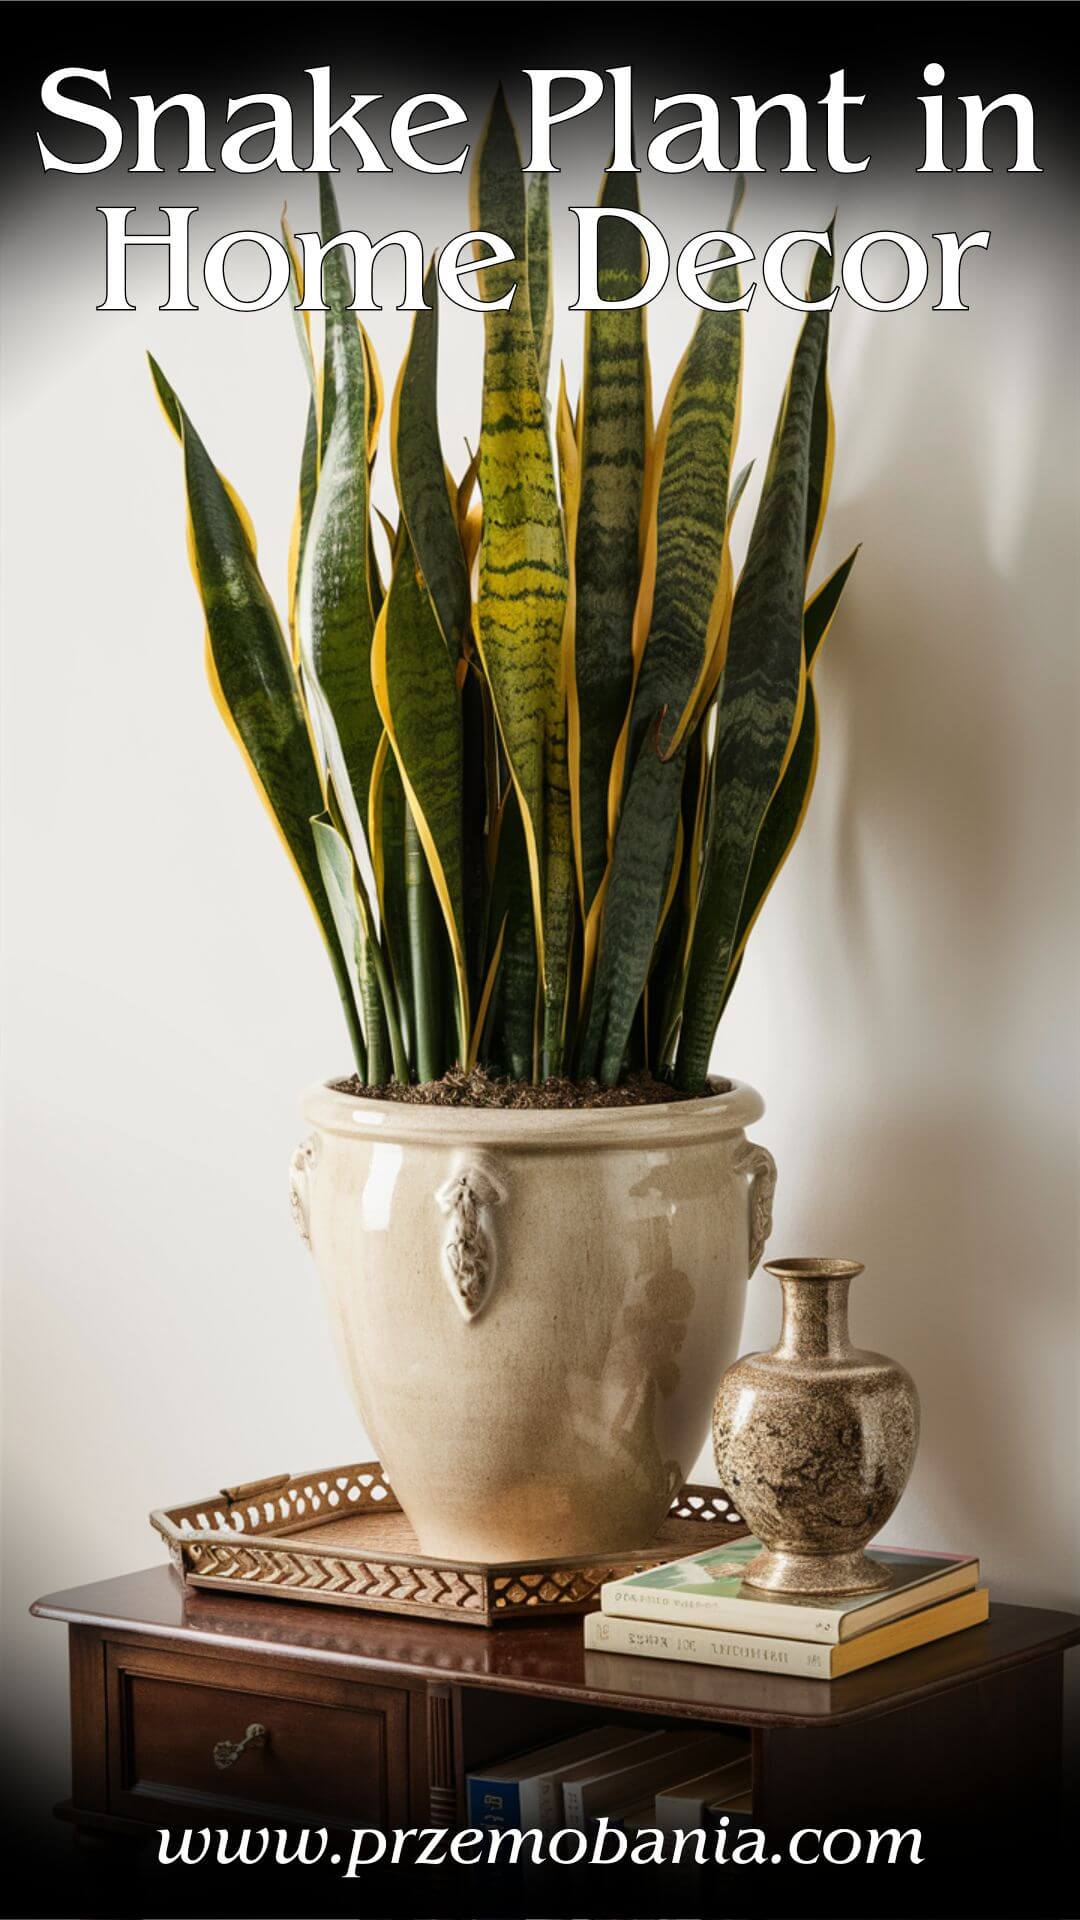 Snake Plant in Home Decor 3